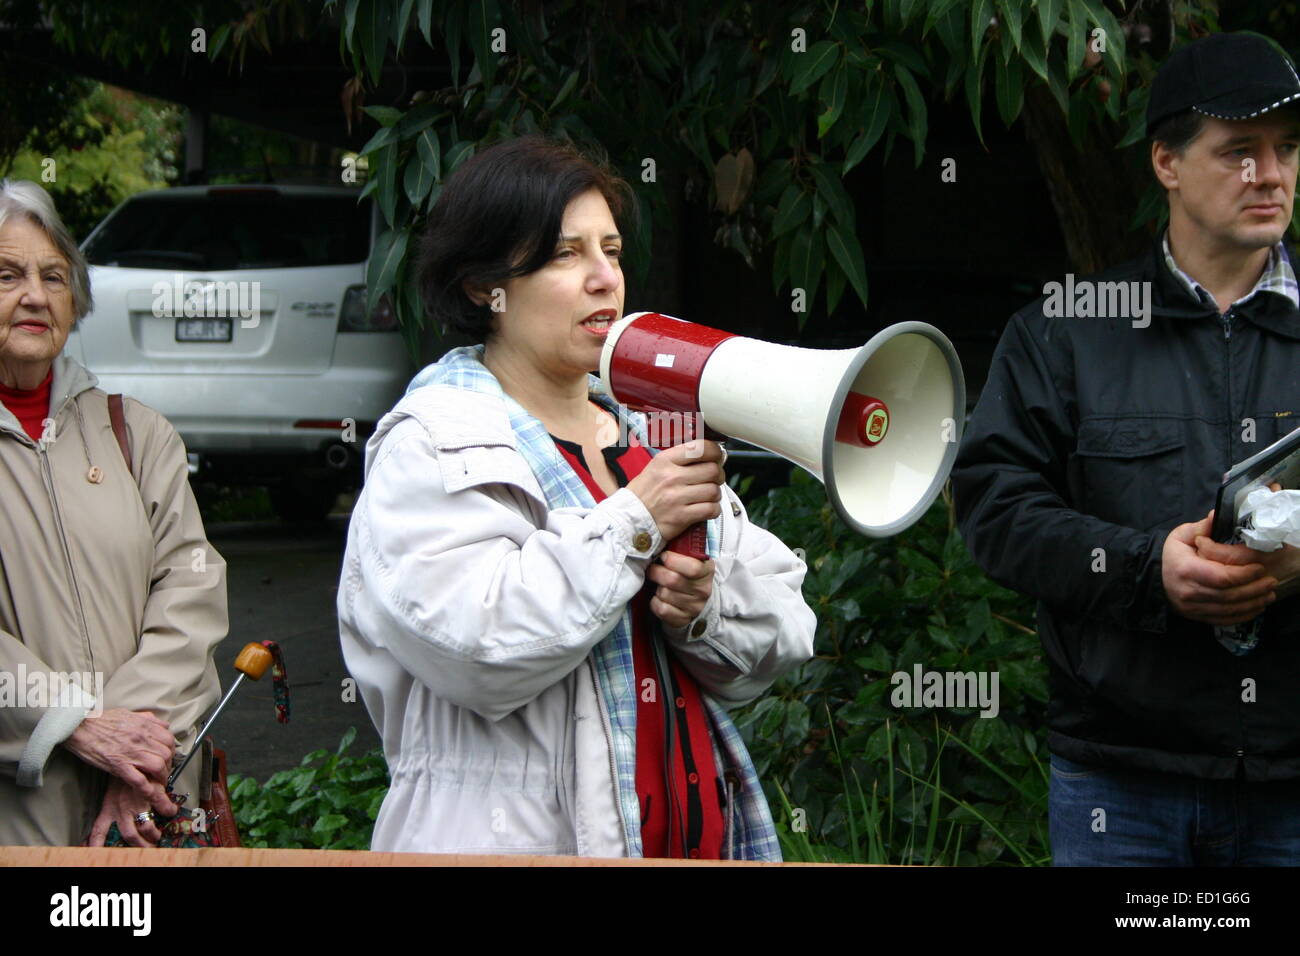 Boronia resident Karin Kaufmann, conducts vocal protest against high rise/high density housing in her suburb. Stock Photo